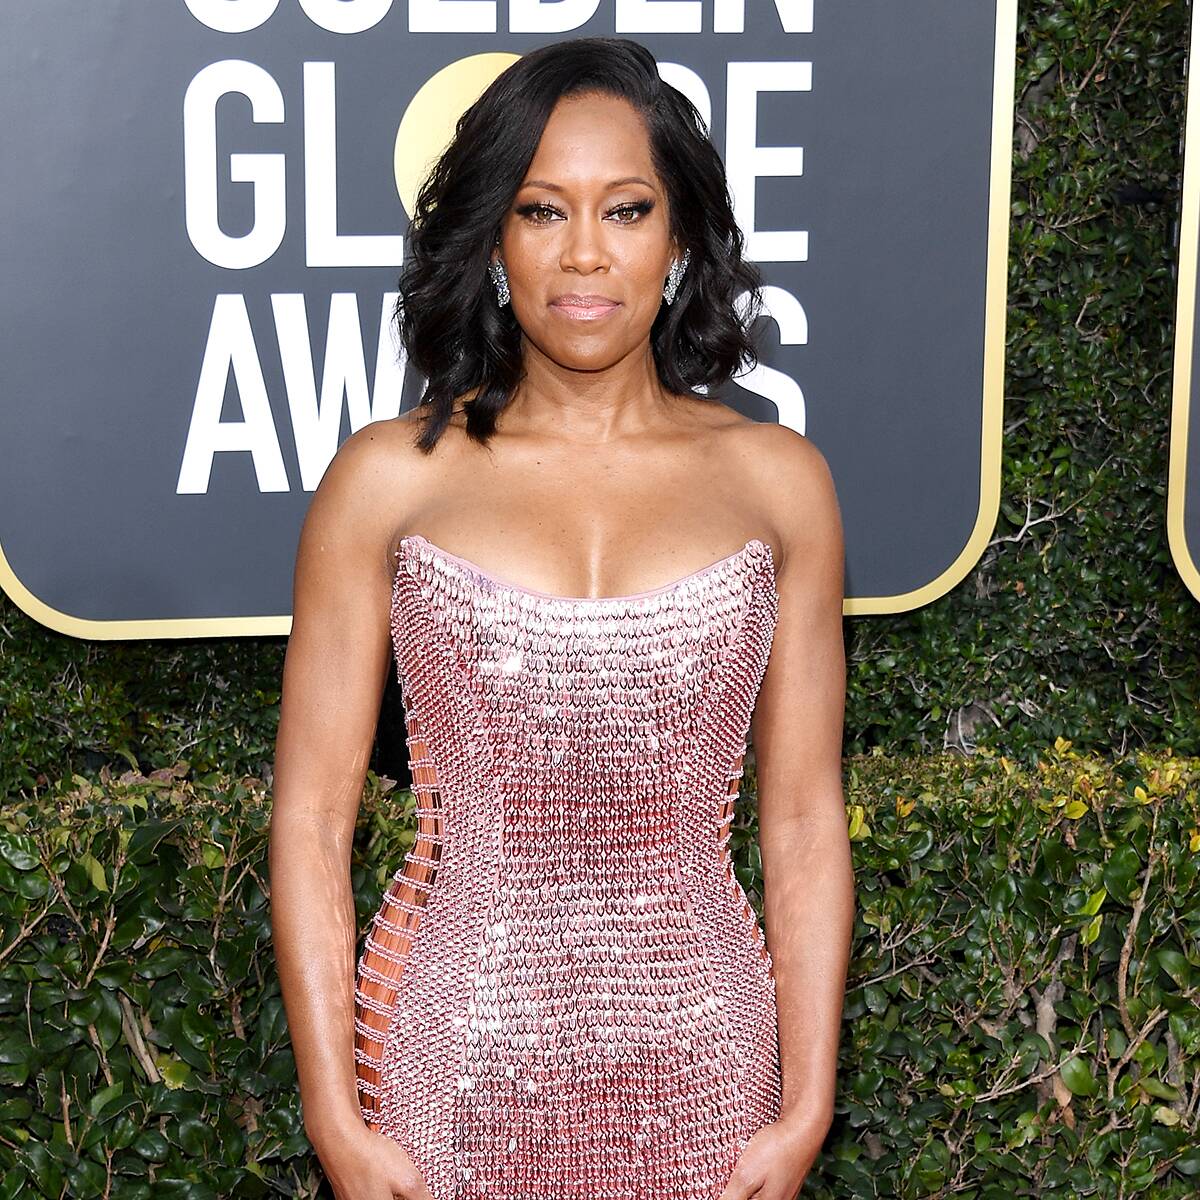 See Birthday Girl Regina King Get Surprised With an Epic Throwback Video